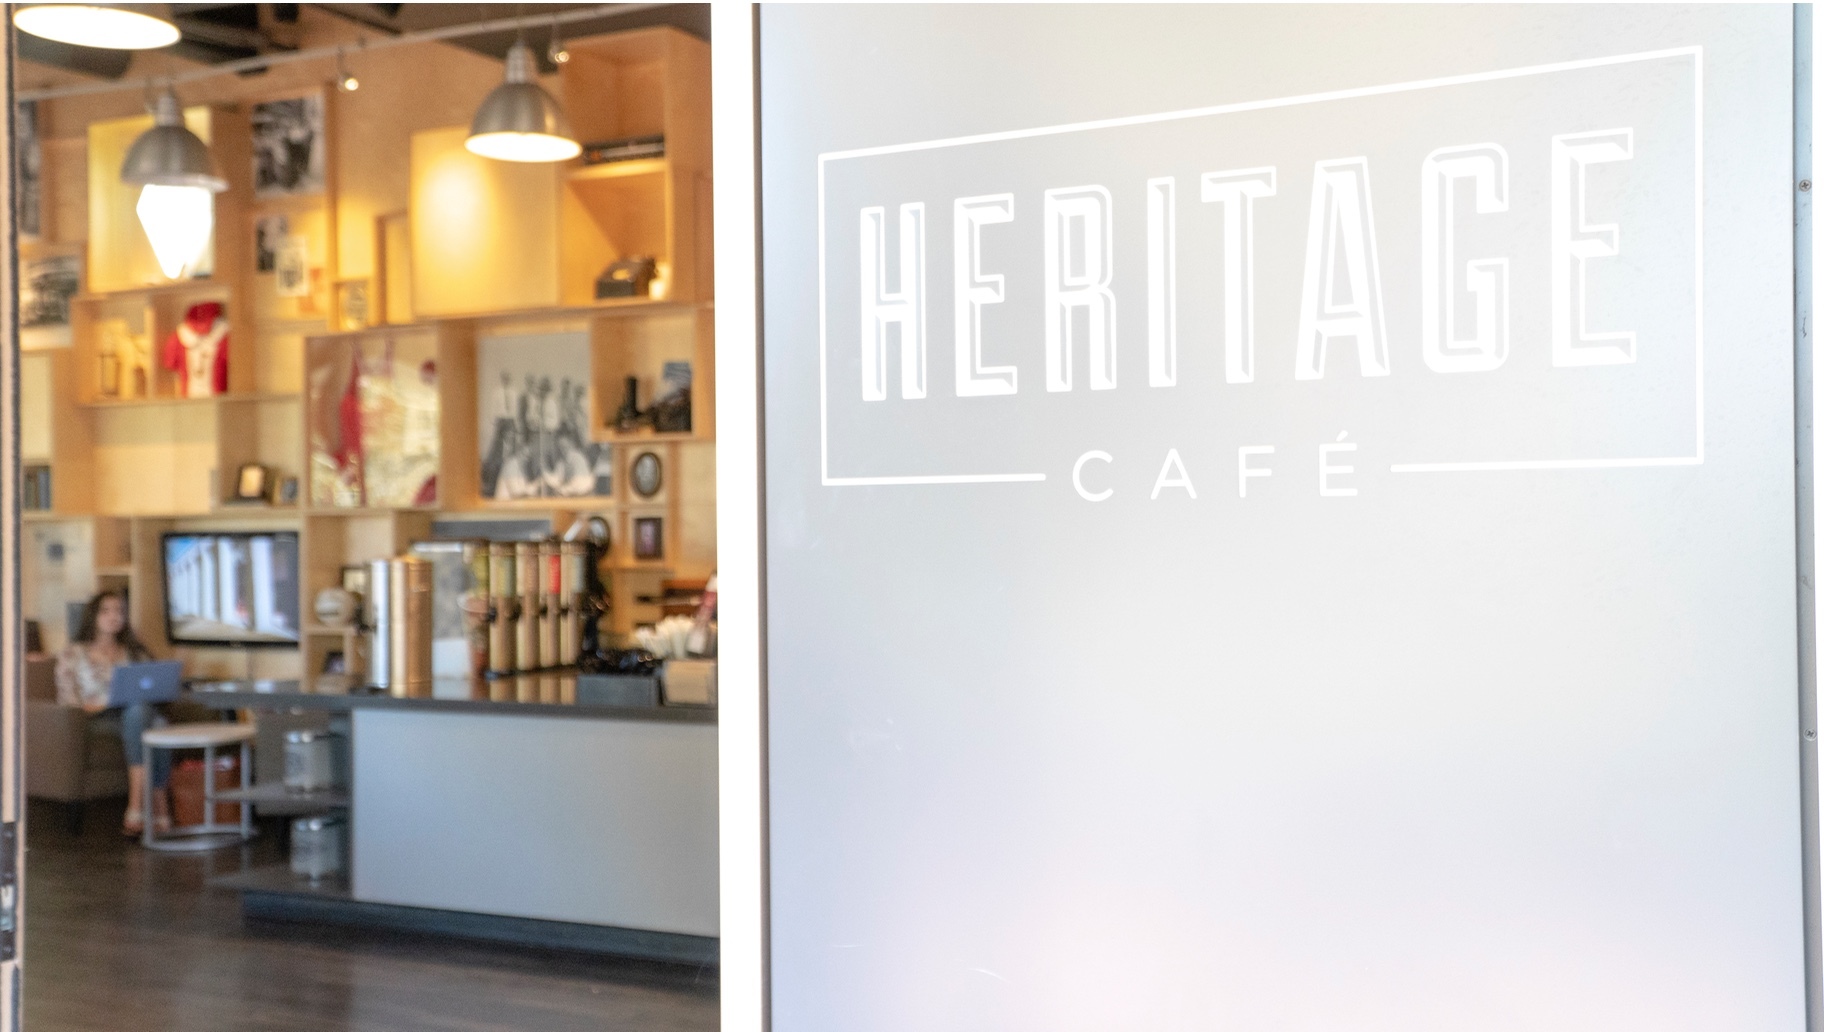 sign that says "Heritage Cafe"